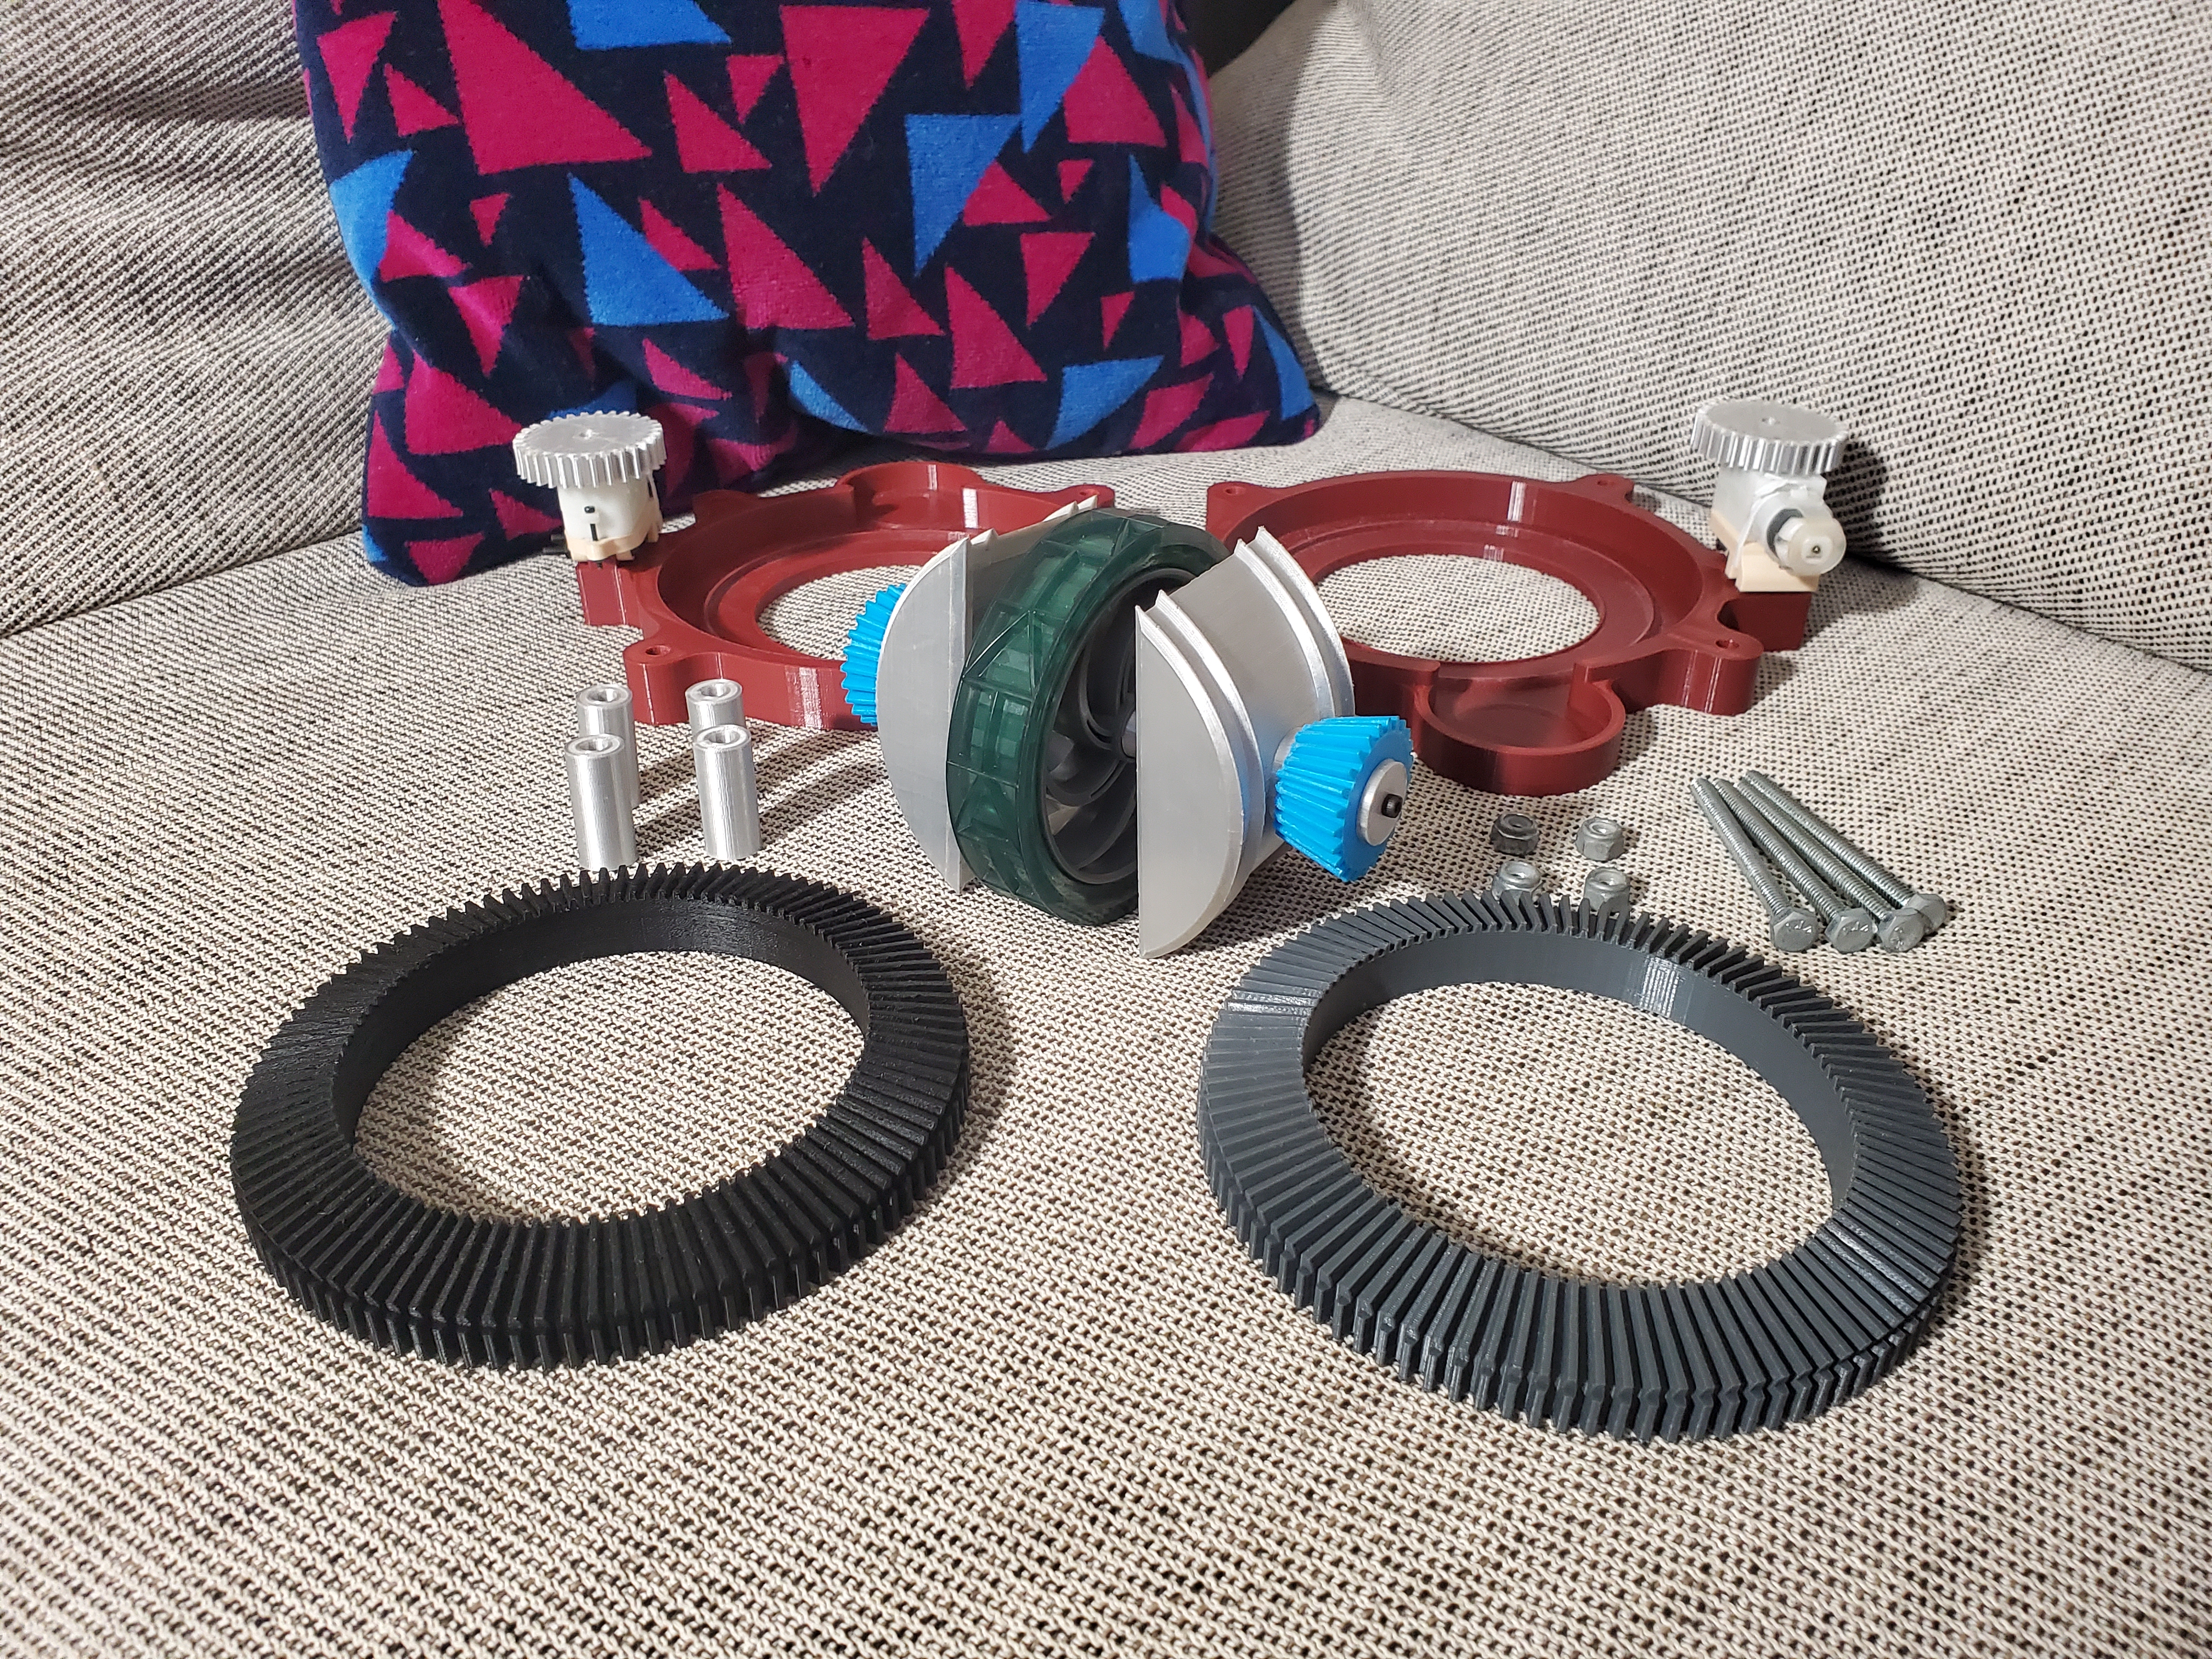 All the 3D printed parts for the swerve drive